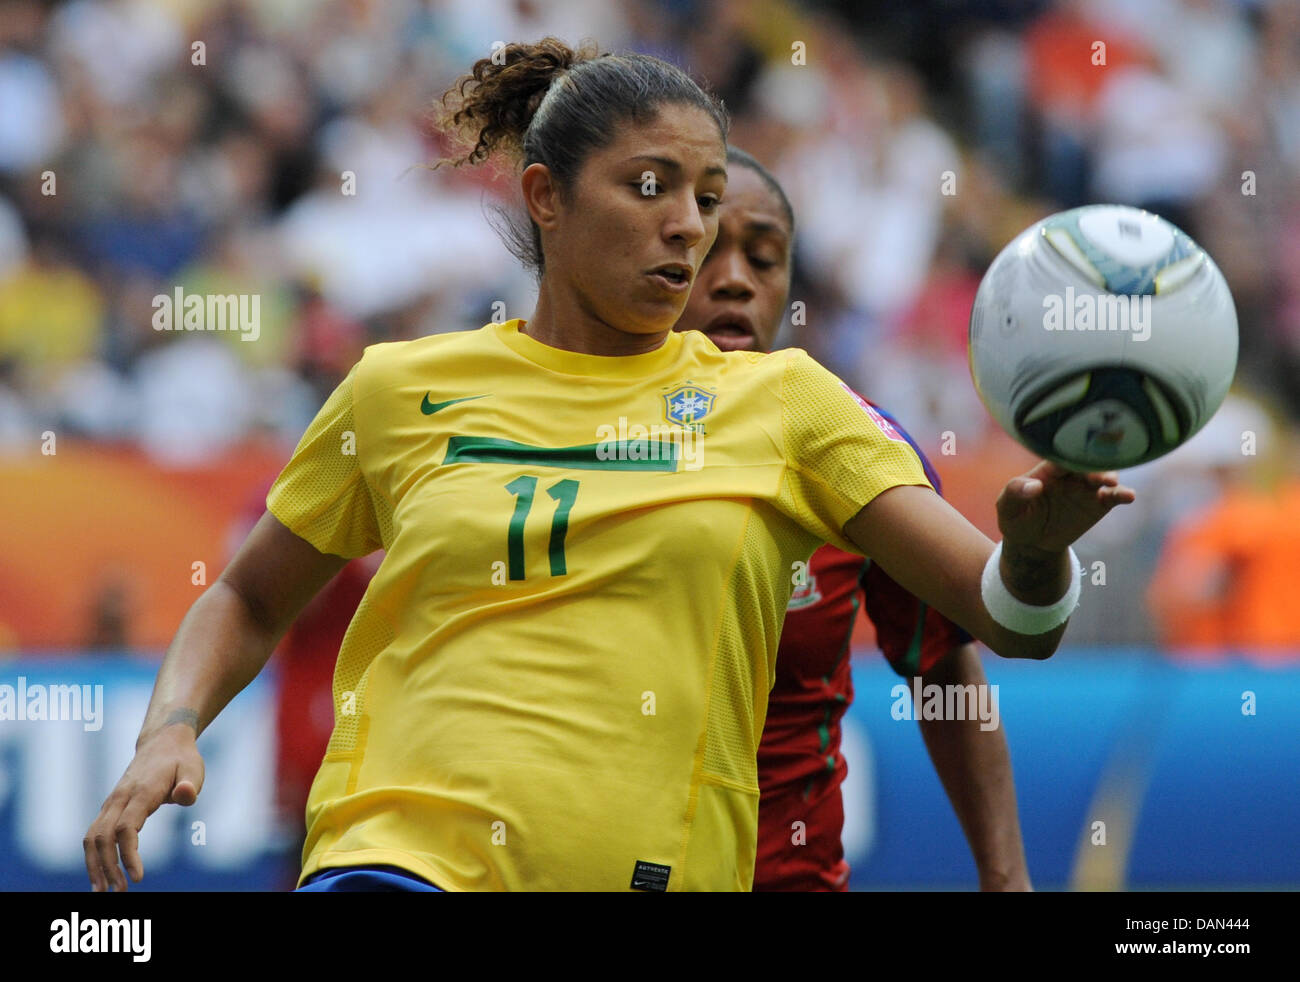 Cristiane of Brazil in action during the Group D match Equatorial Guinea against Brazil of FIFA Women's World Cup soccer tournament at the FIFA Women's World Cup Stadium in Frankfurt, Germany, 06 July 2011. Foto: Arne Dedert dpa/lhe Stock Photo